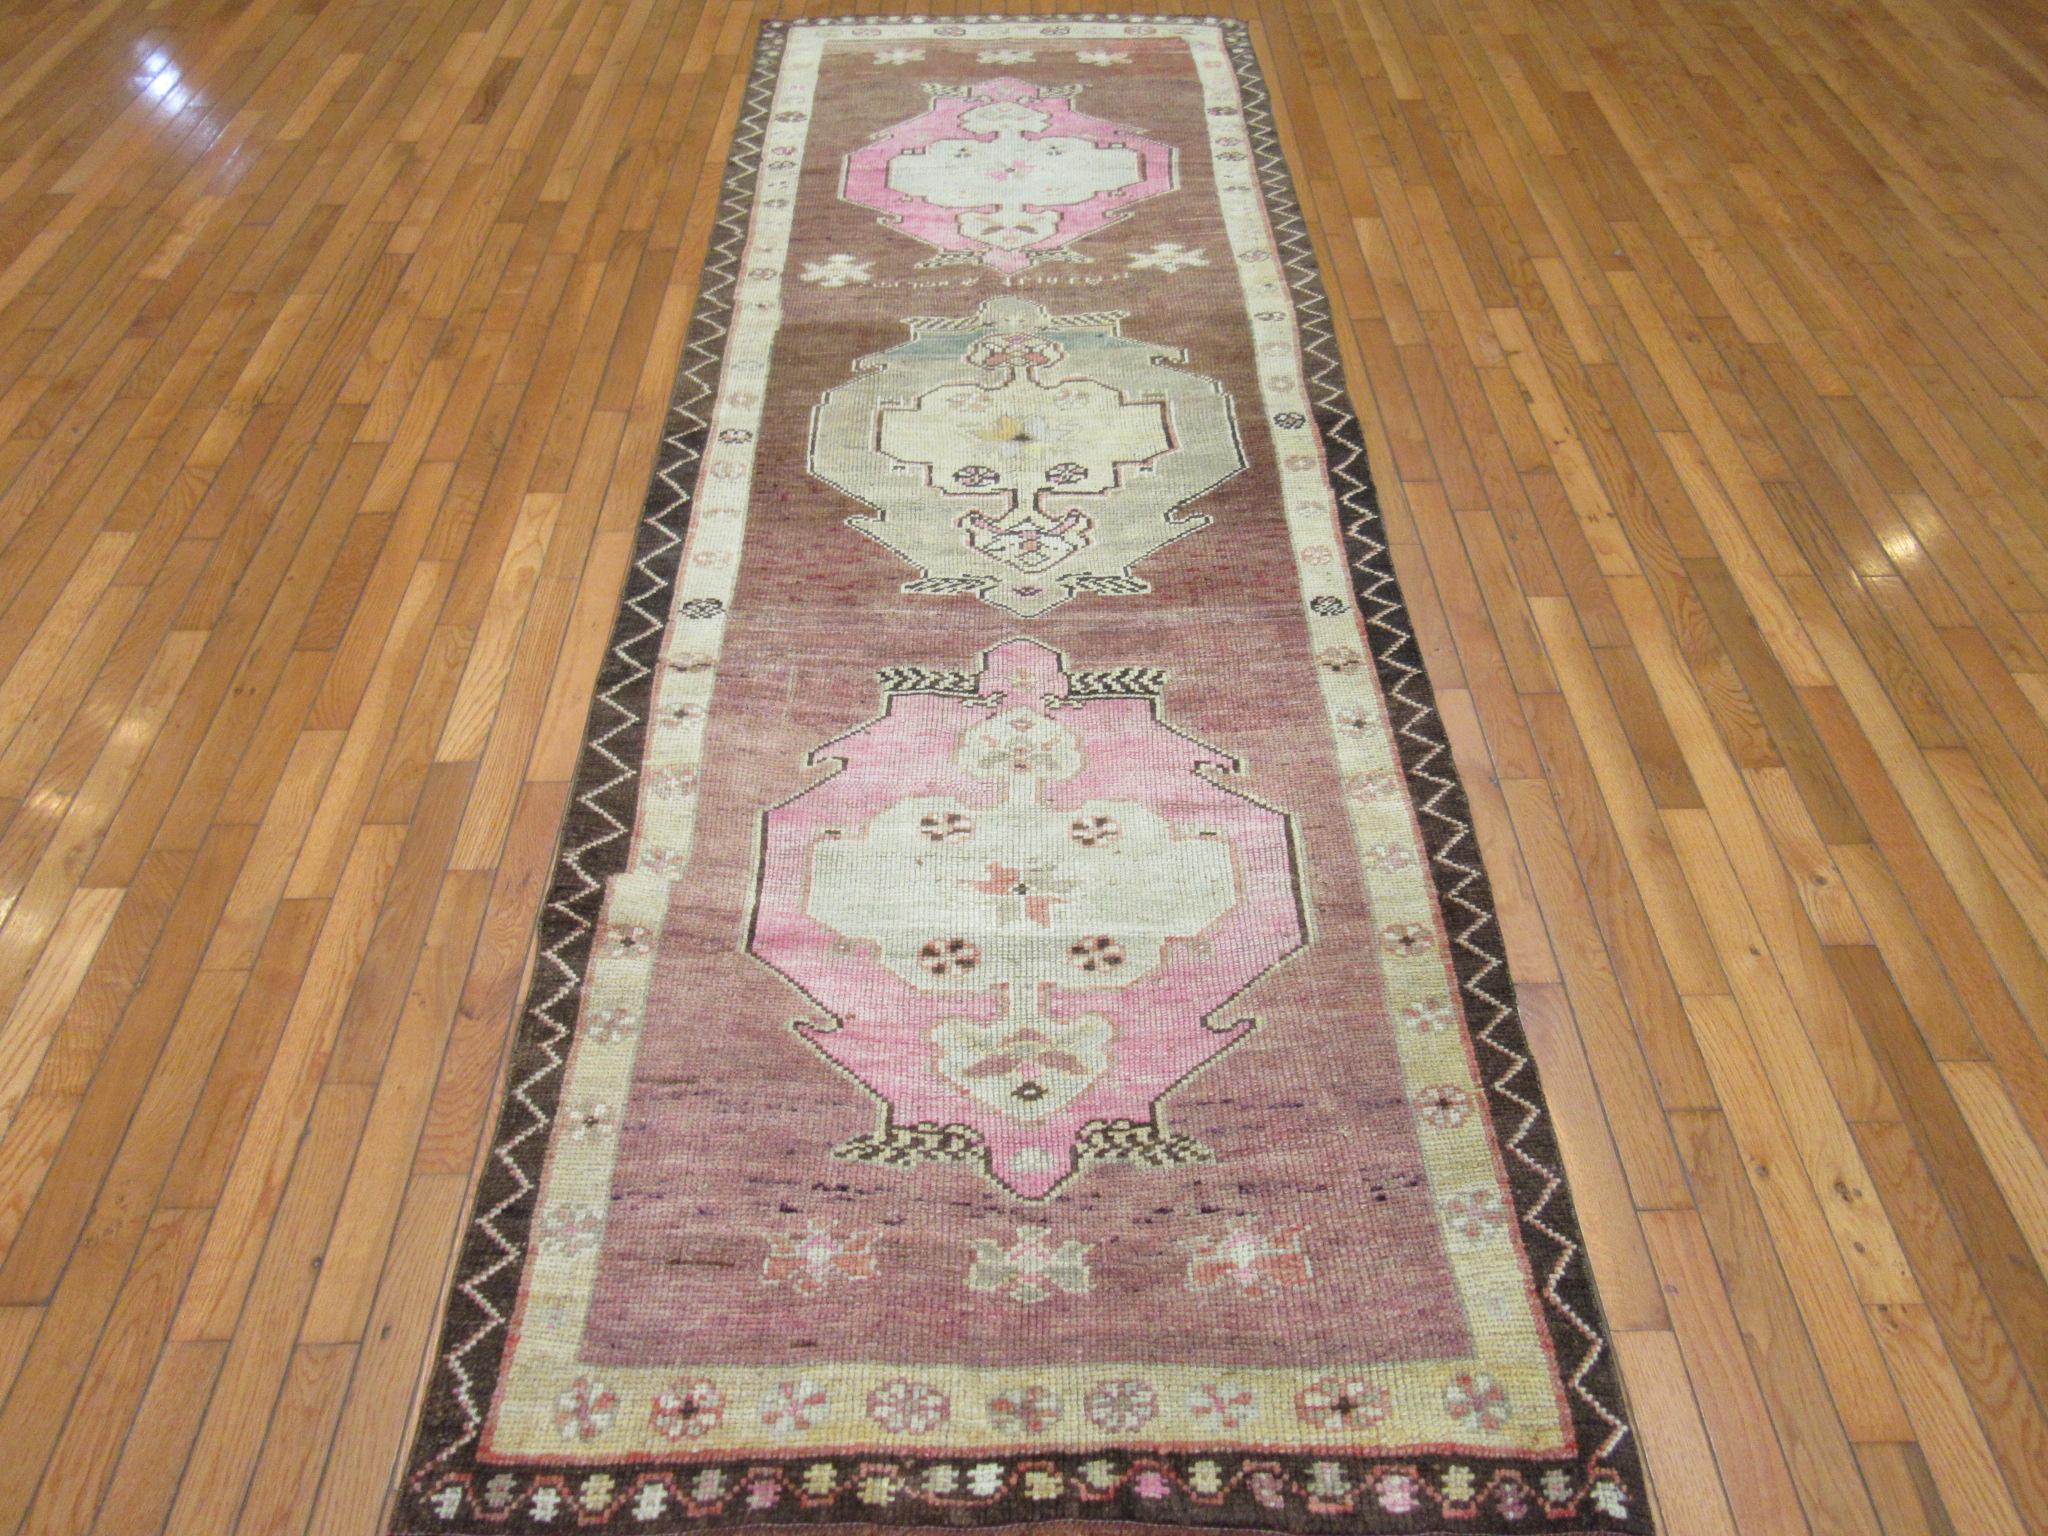 This is a vintage hand-knotted Turkish runner rug from the Anatolian region. It is made with wool in a simple tribal pattern. This runner would enhance the look of any hall or space. It measures 3' 5'' x 10' 8'' and in great condition.